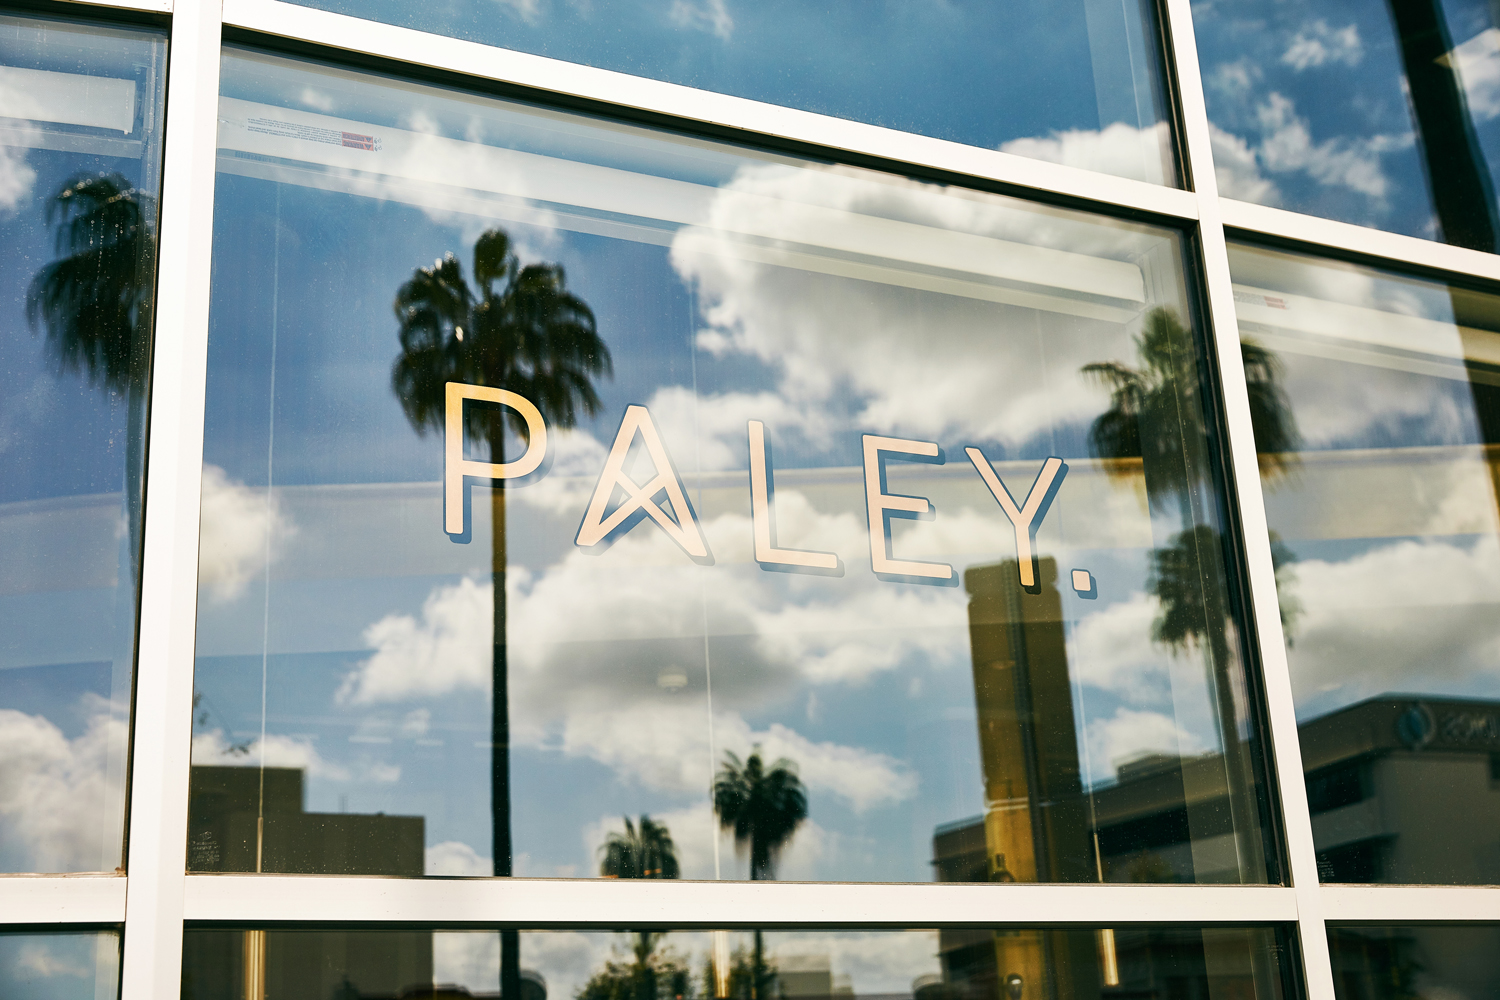 Brand identity and signage for Los Angeles restaurant Paley designed by Mucca, United States